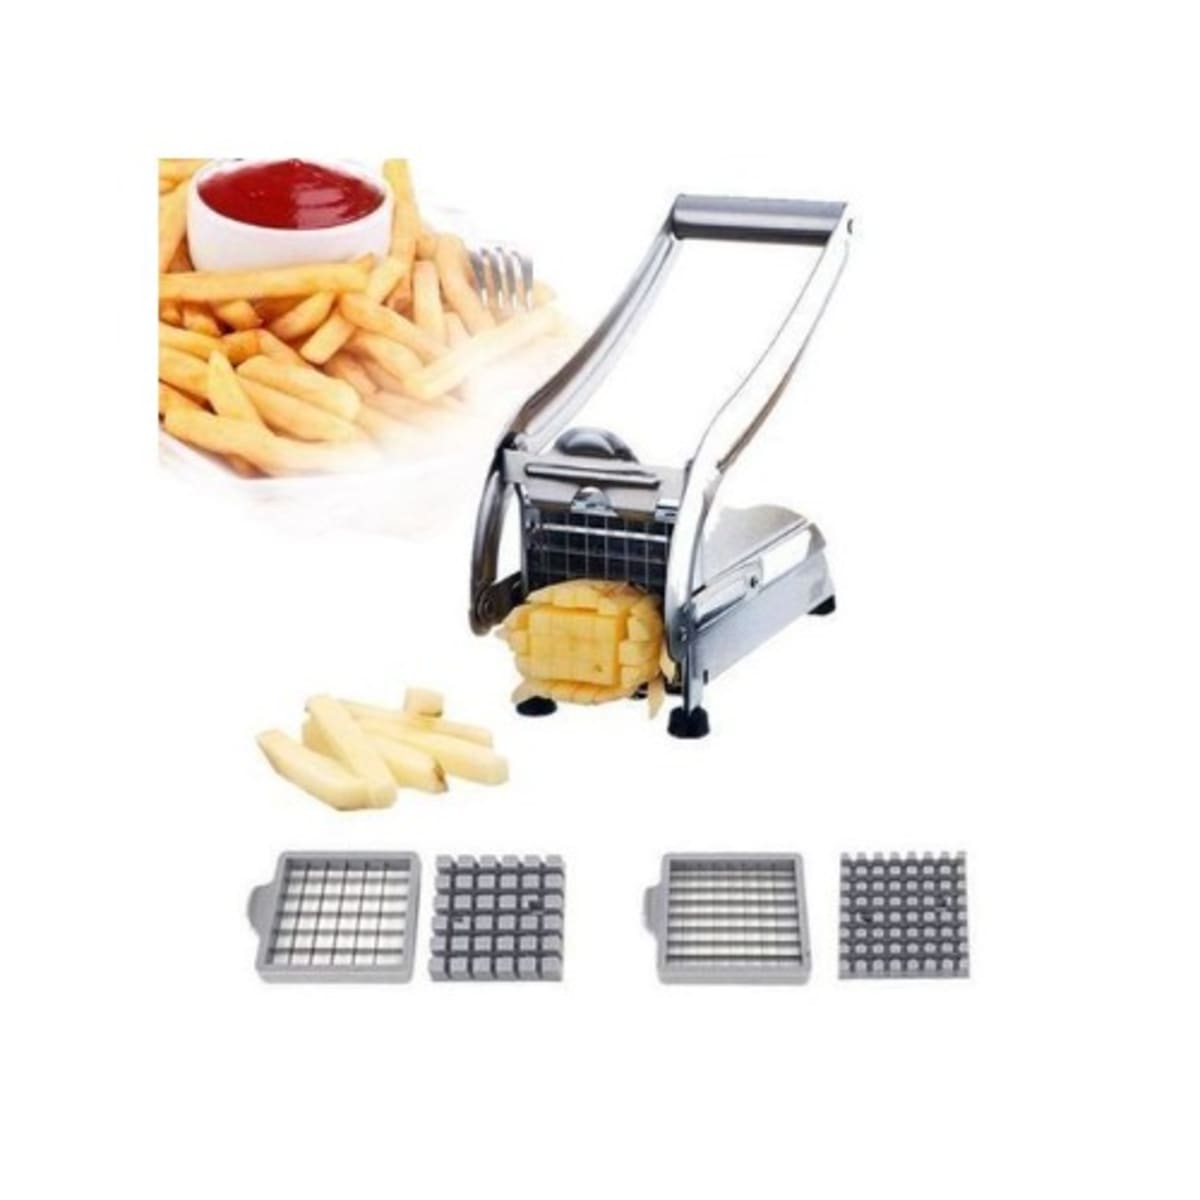 Stainless Steel Potato Cutter Chipper, French Fry Slicer Chipper